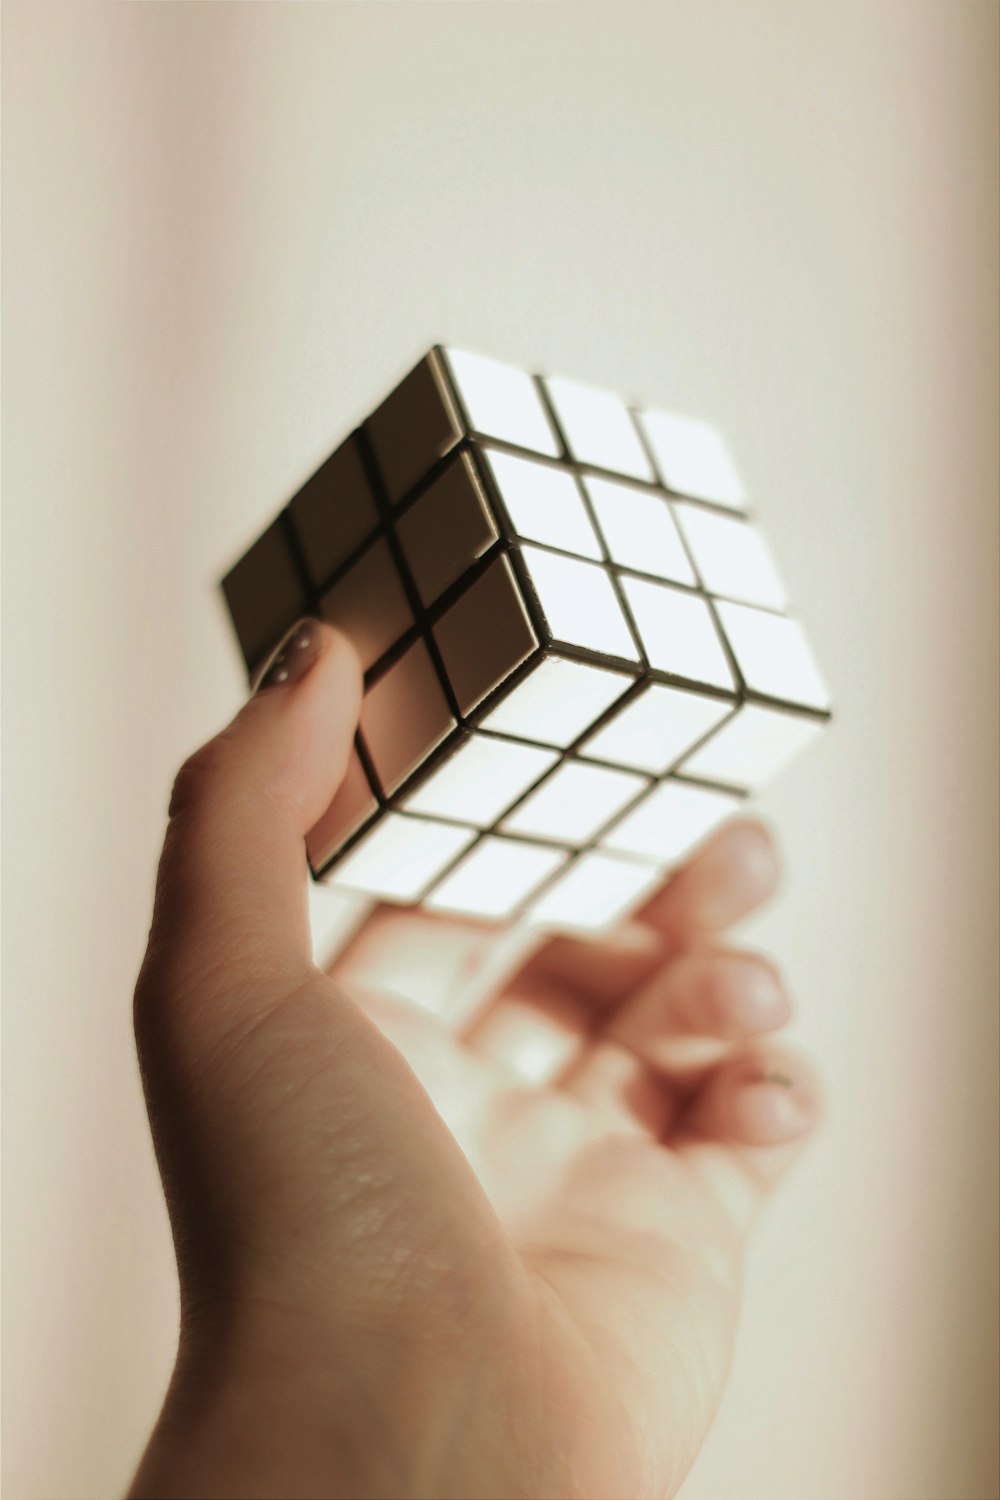 person holding 3 x 3 rubiks cube